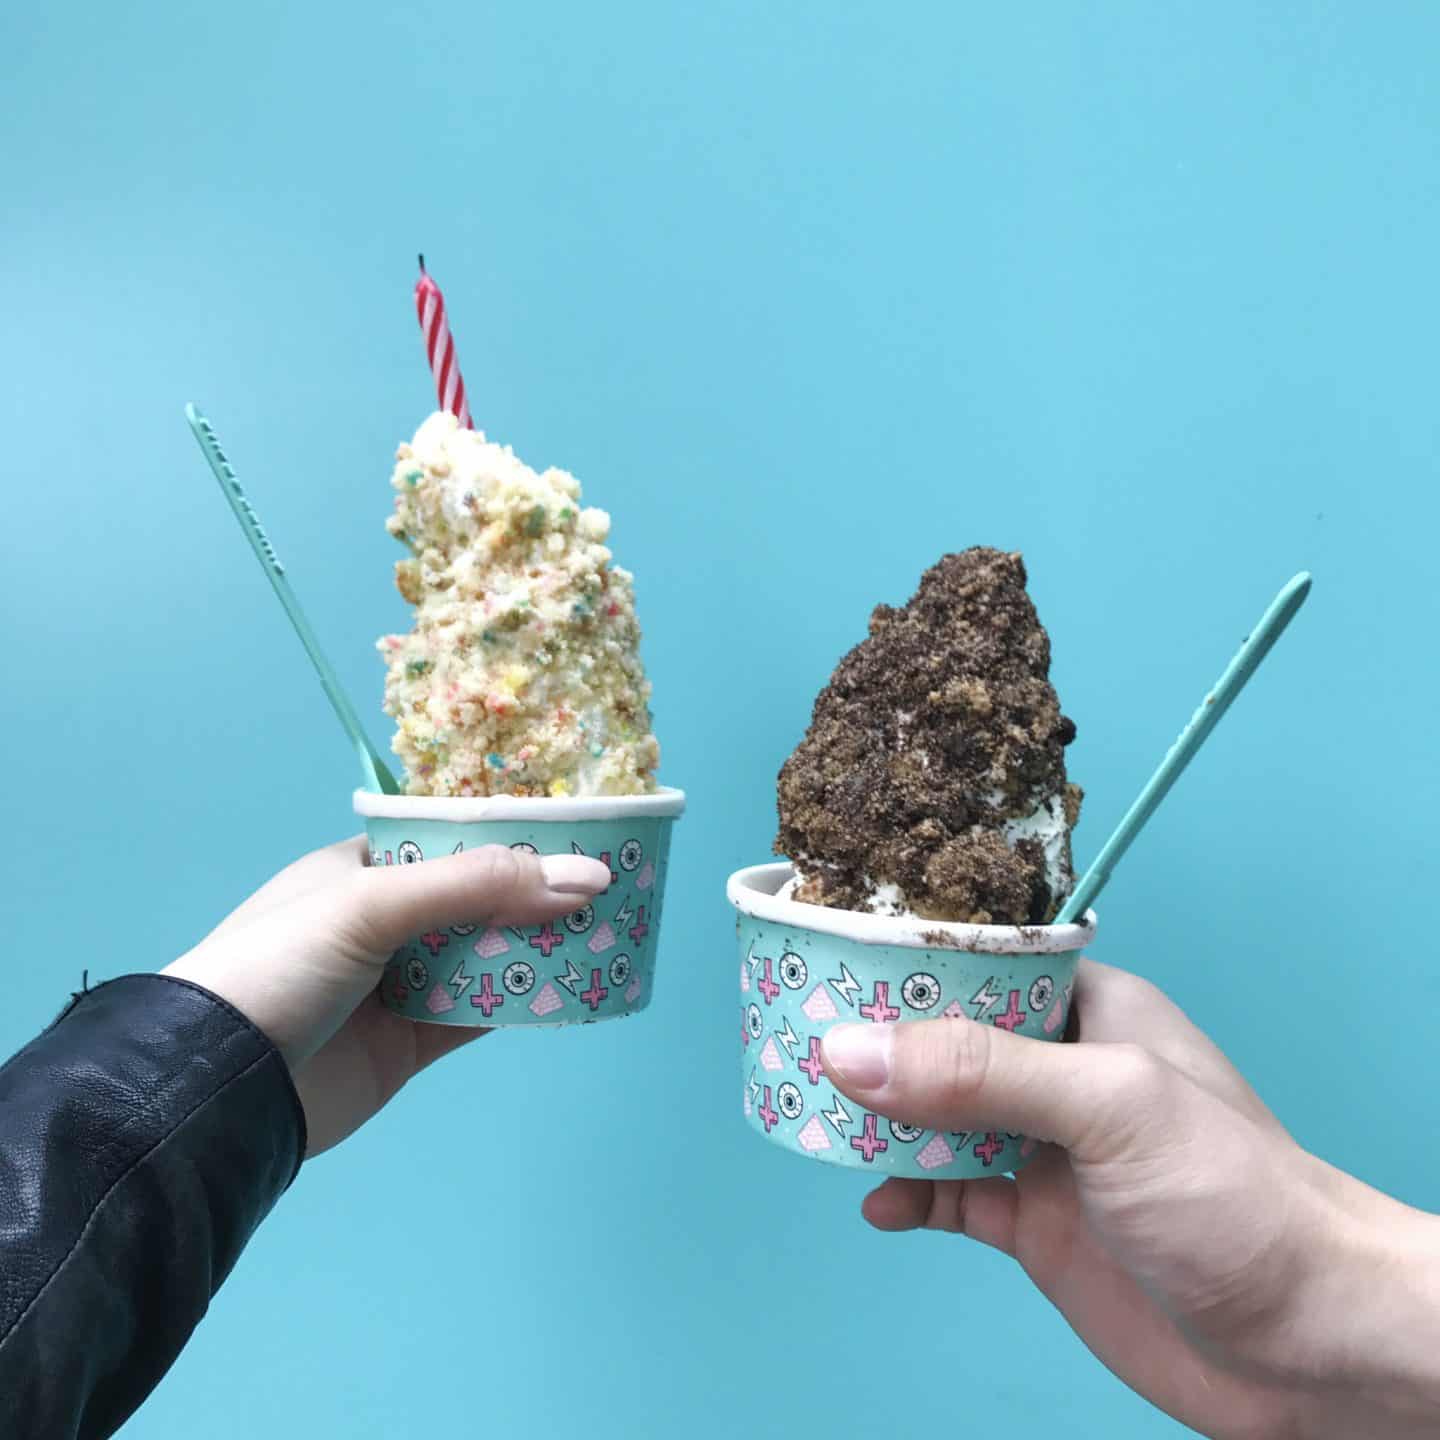 Best Toronto ice cream spots | top ice cream places in Toronto | where to get dessert in Toronto, Ontario, Canada | Toronto foodie travel guide | Diary of a Toronto Girl, a Canadian lifestyle blog